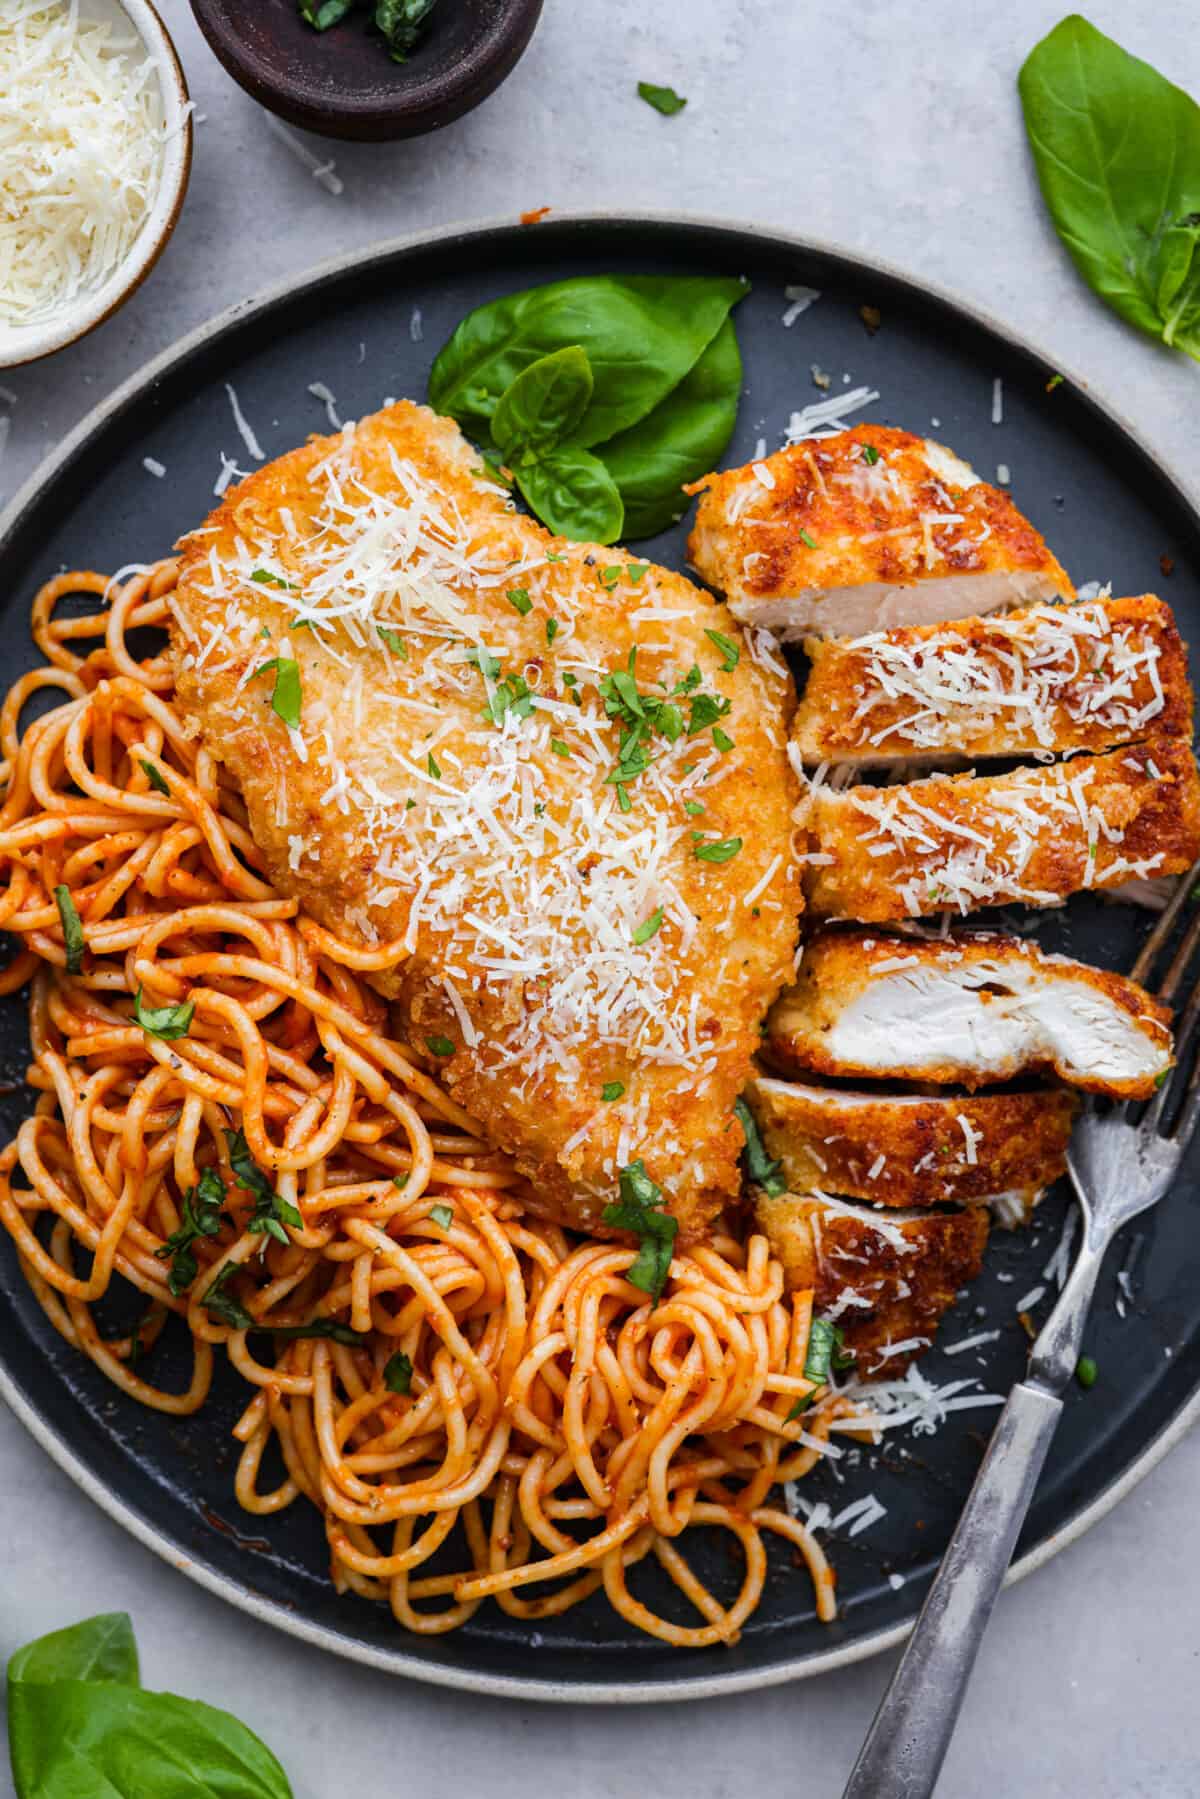 Chicken romano served on a dark blue plate with spaghetti noodles.